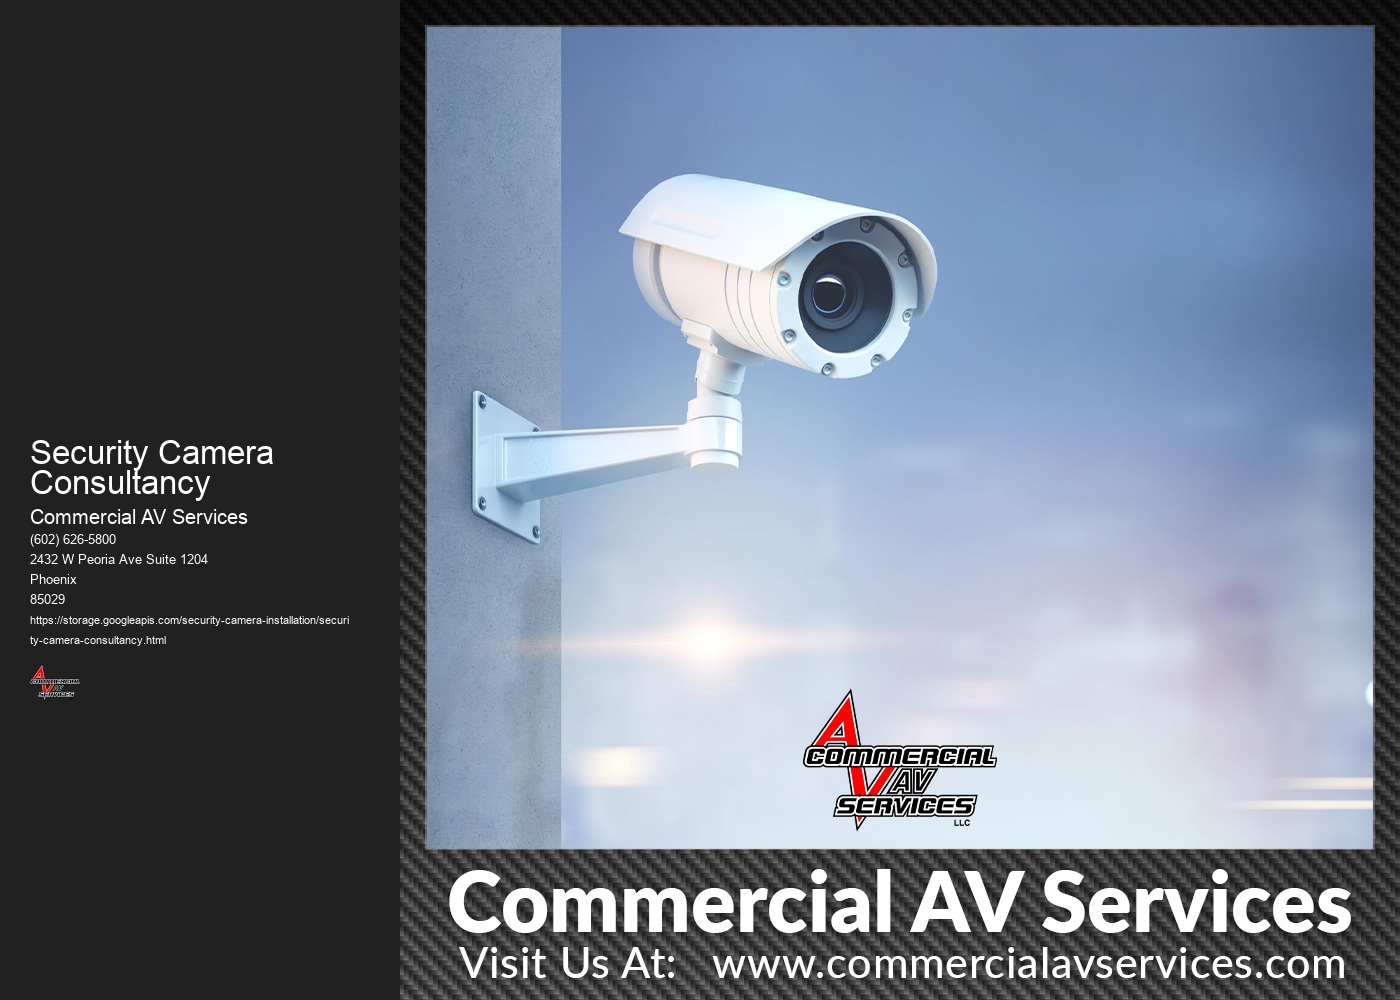 What are the benefits of using IP cameras over analog cameras for residential security?